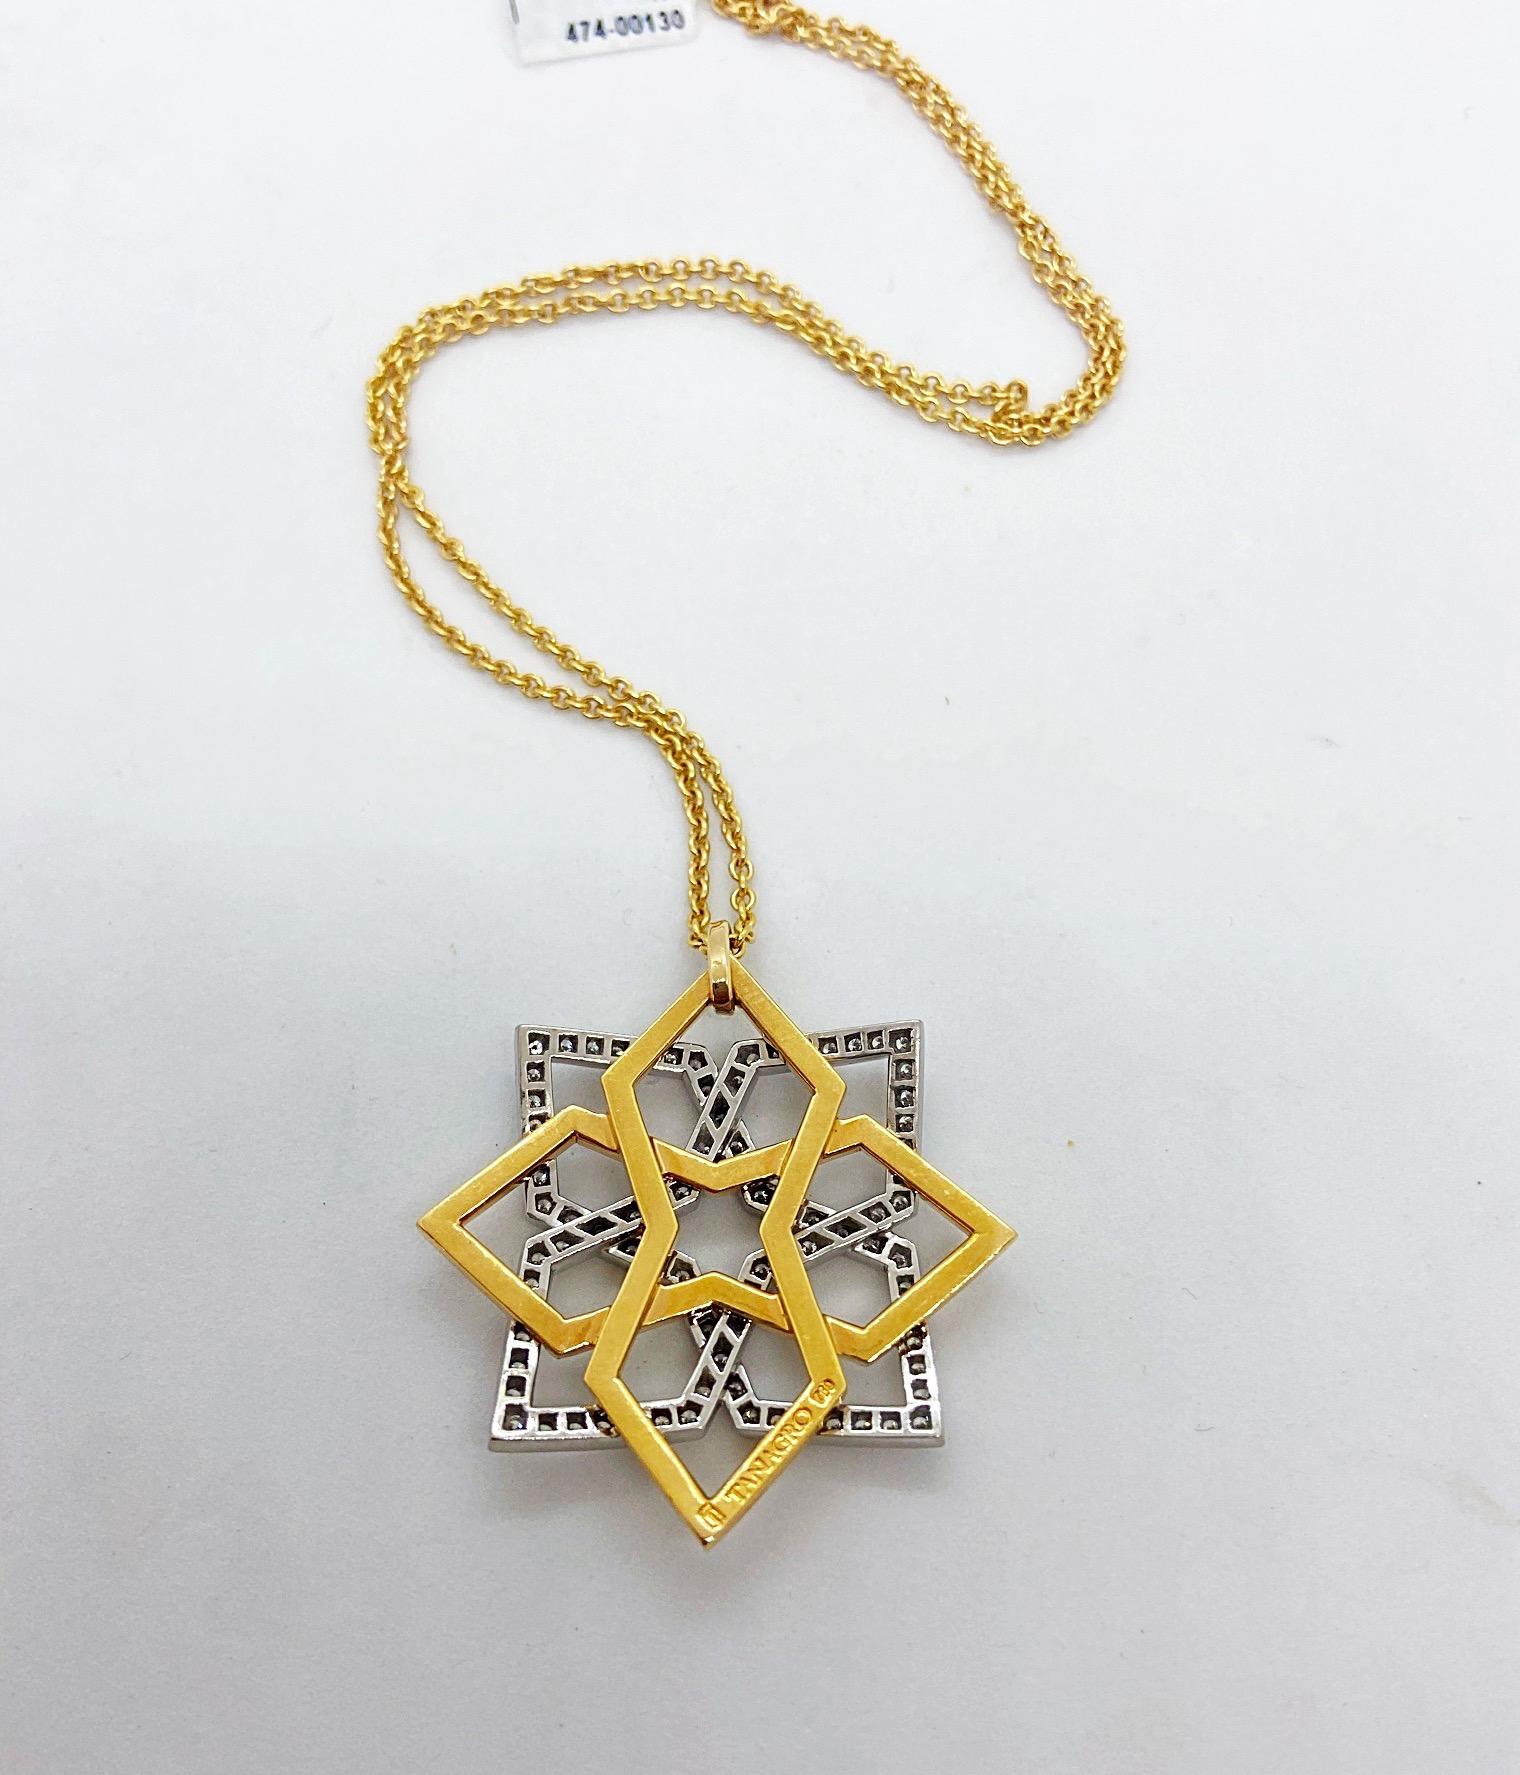 This edgy pendant is a geometric design in a shiny 18 karat rose gold layered with a white gold section set with a single row of round brilliant diamonds. The 1.5